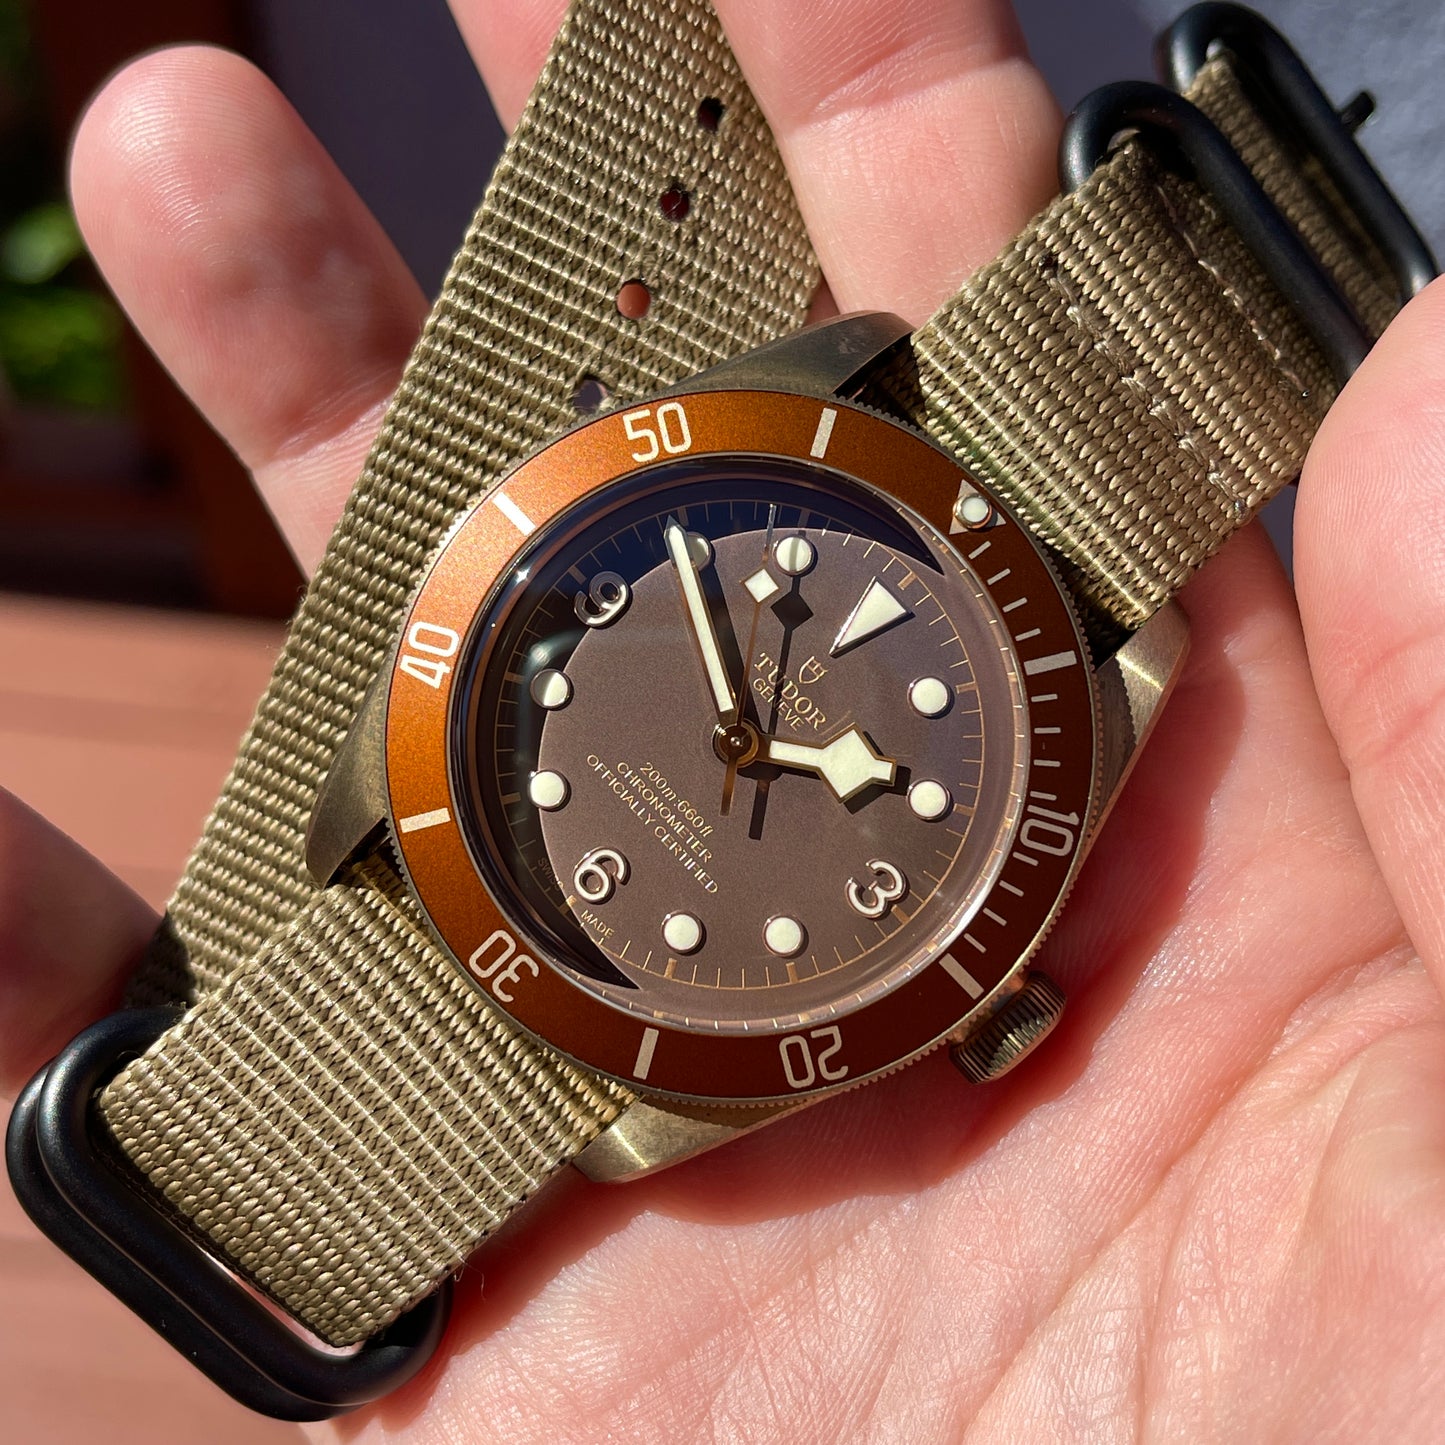 2019 Tudor Heritage Black Bay Bronze 79250BM Tobacco Brown Automatic Wristwatch Box Papers - Hashtag Watch Company